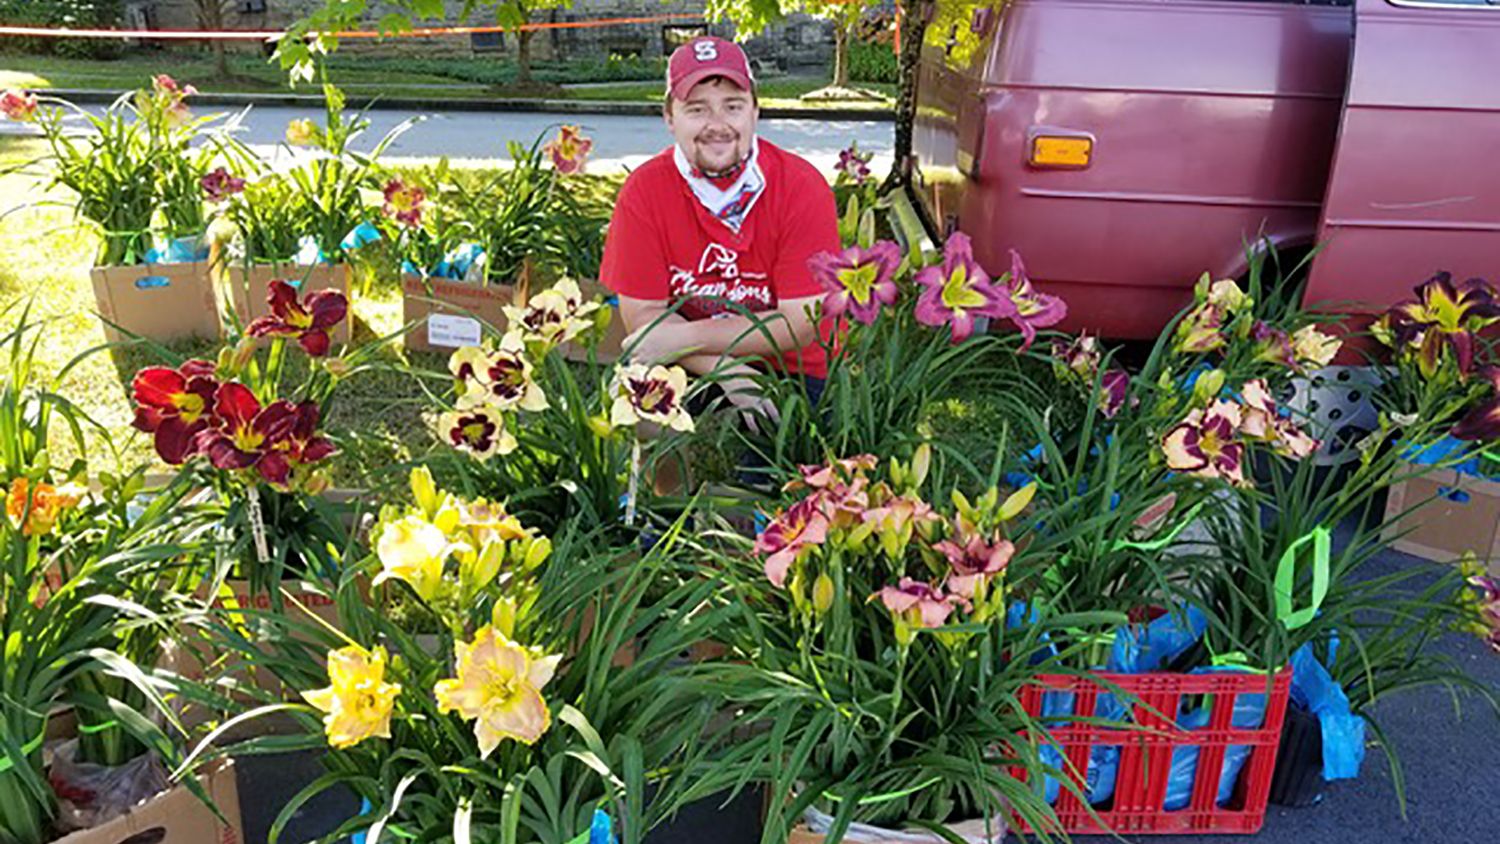 Man sitting among pots of colorful flowers